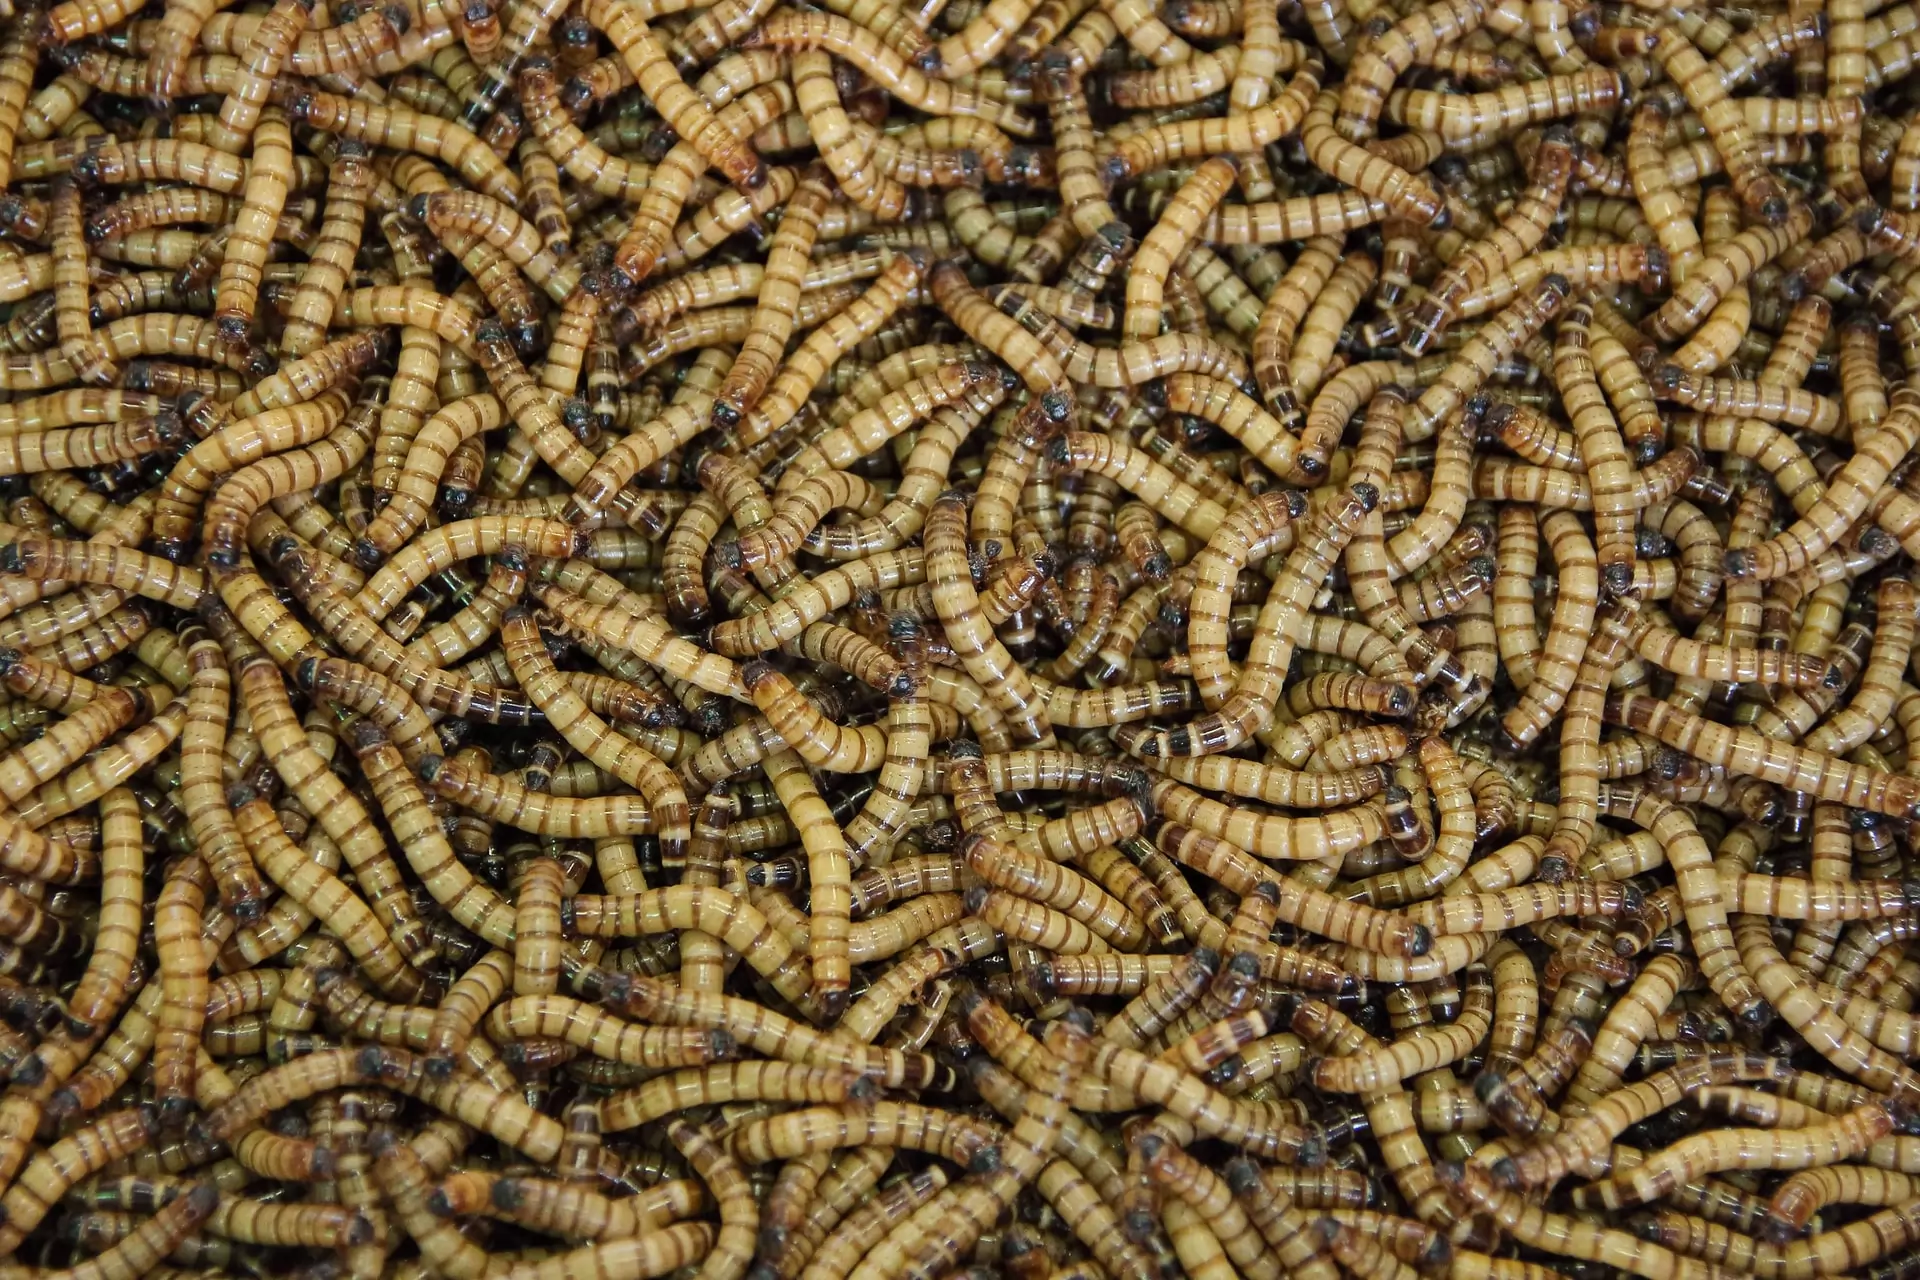 the edible insect market